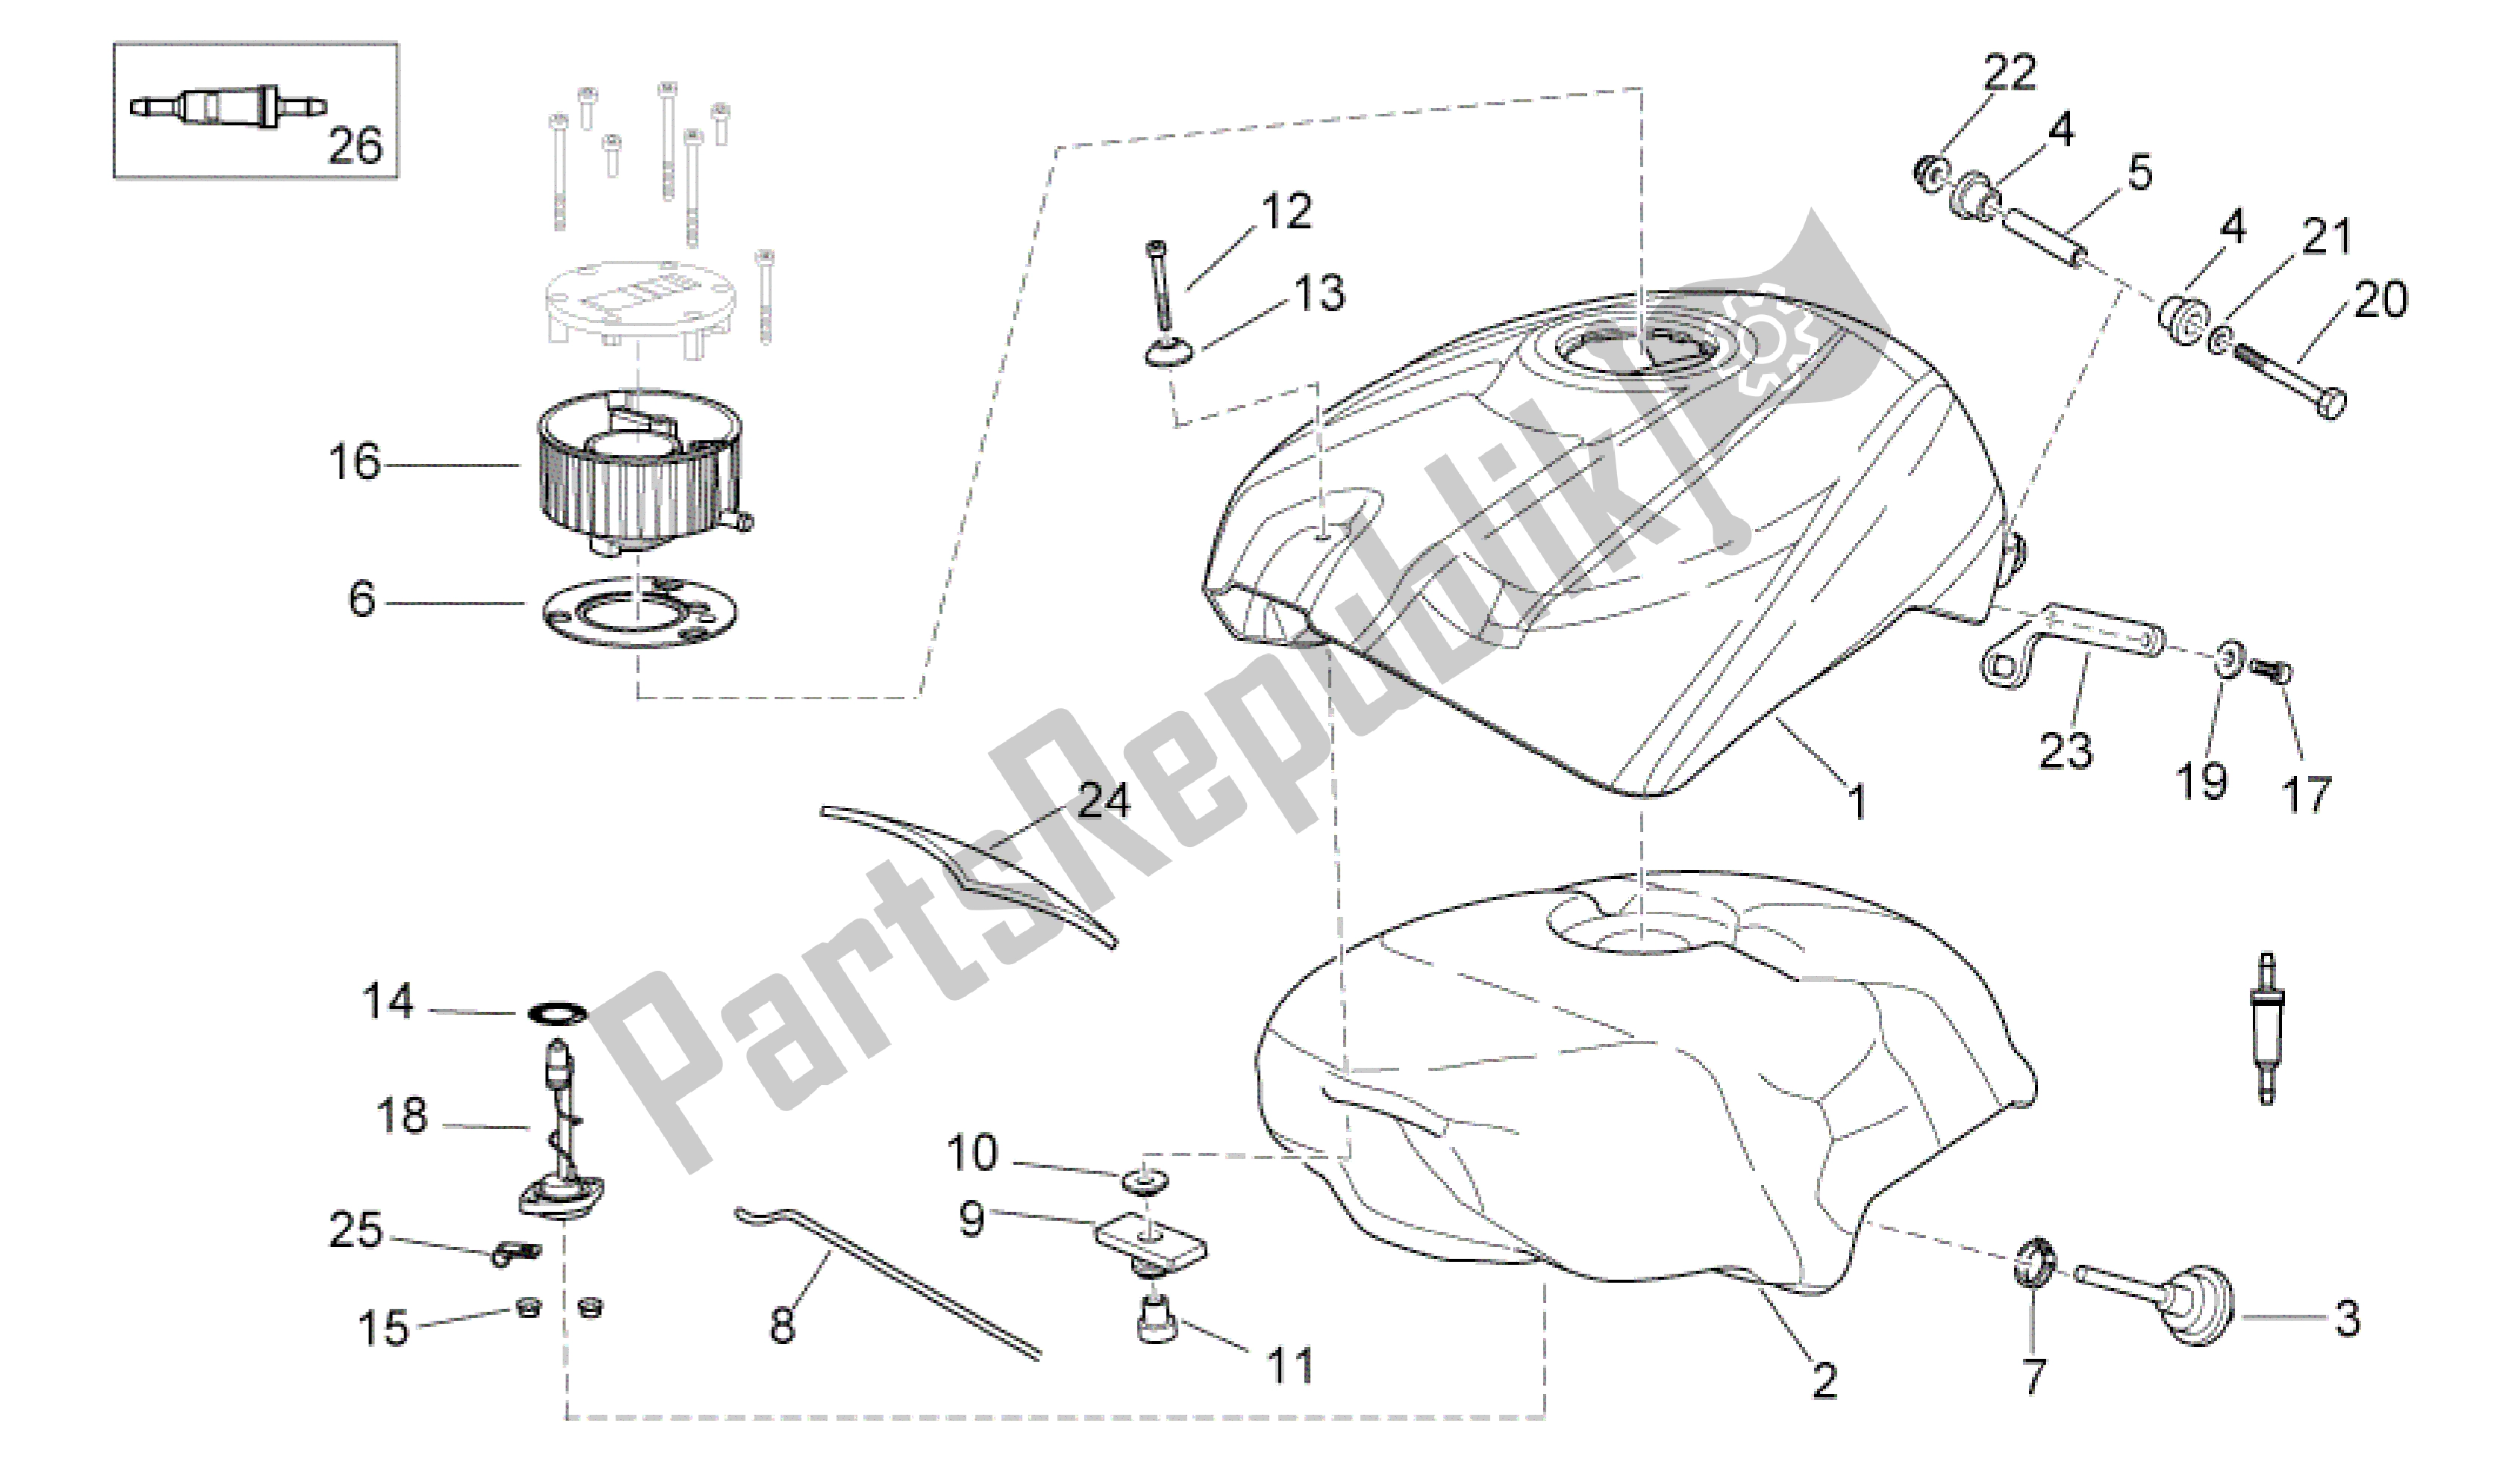 All parts for the DepÓsito Combustible of the Aprilia RS 125 2006 - 2010